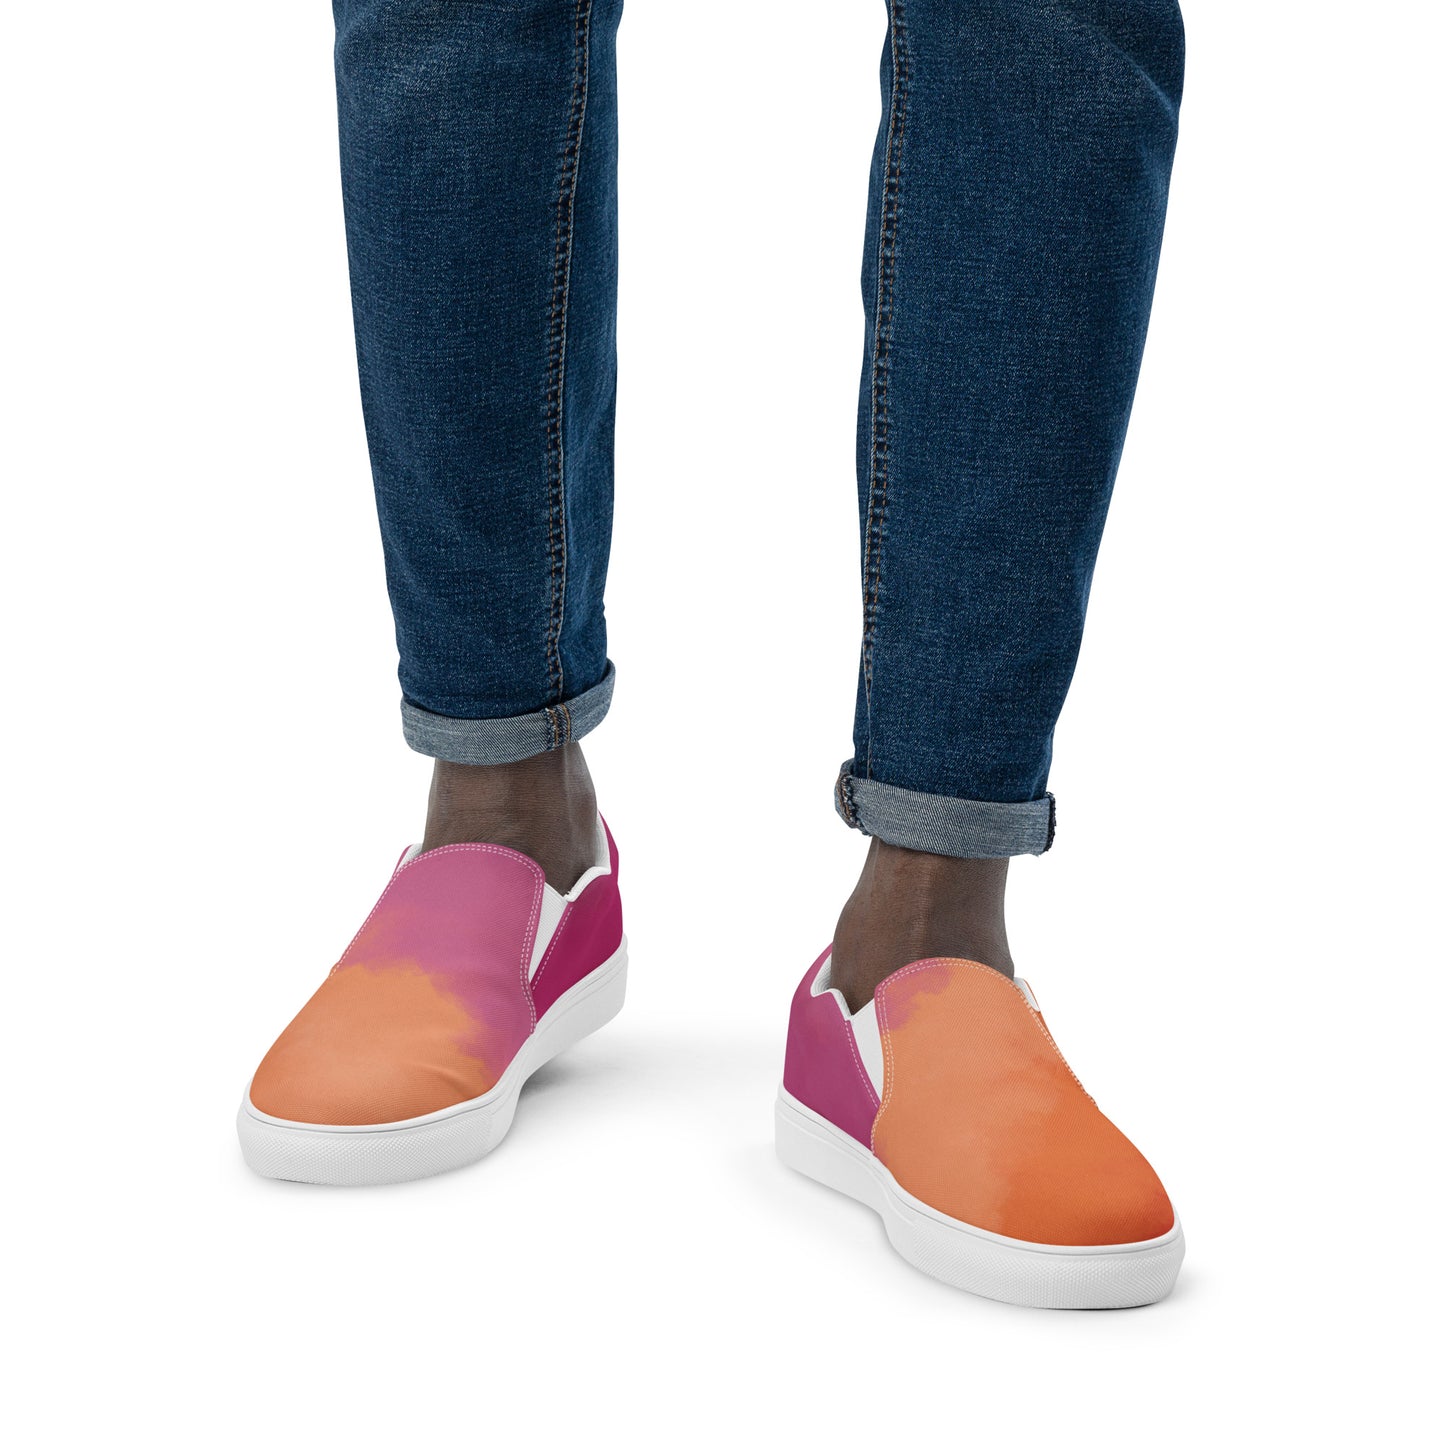 Front view: A model wears a pair of slip on canvas shoes with the colors of the lesbian pride flag in a cloudy texture, a white heart on the side, and the Aras Sivad logo on the back.